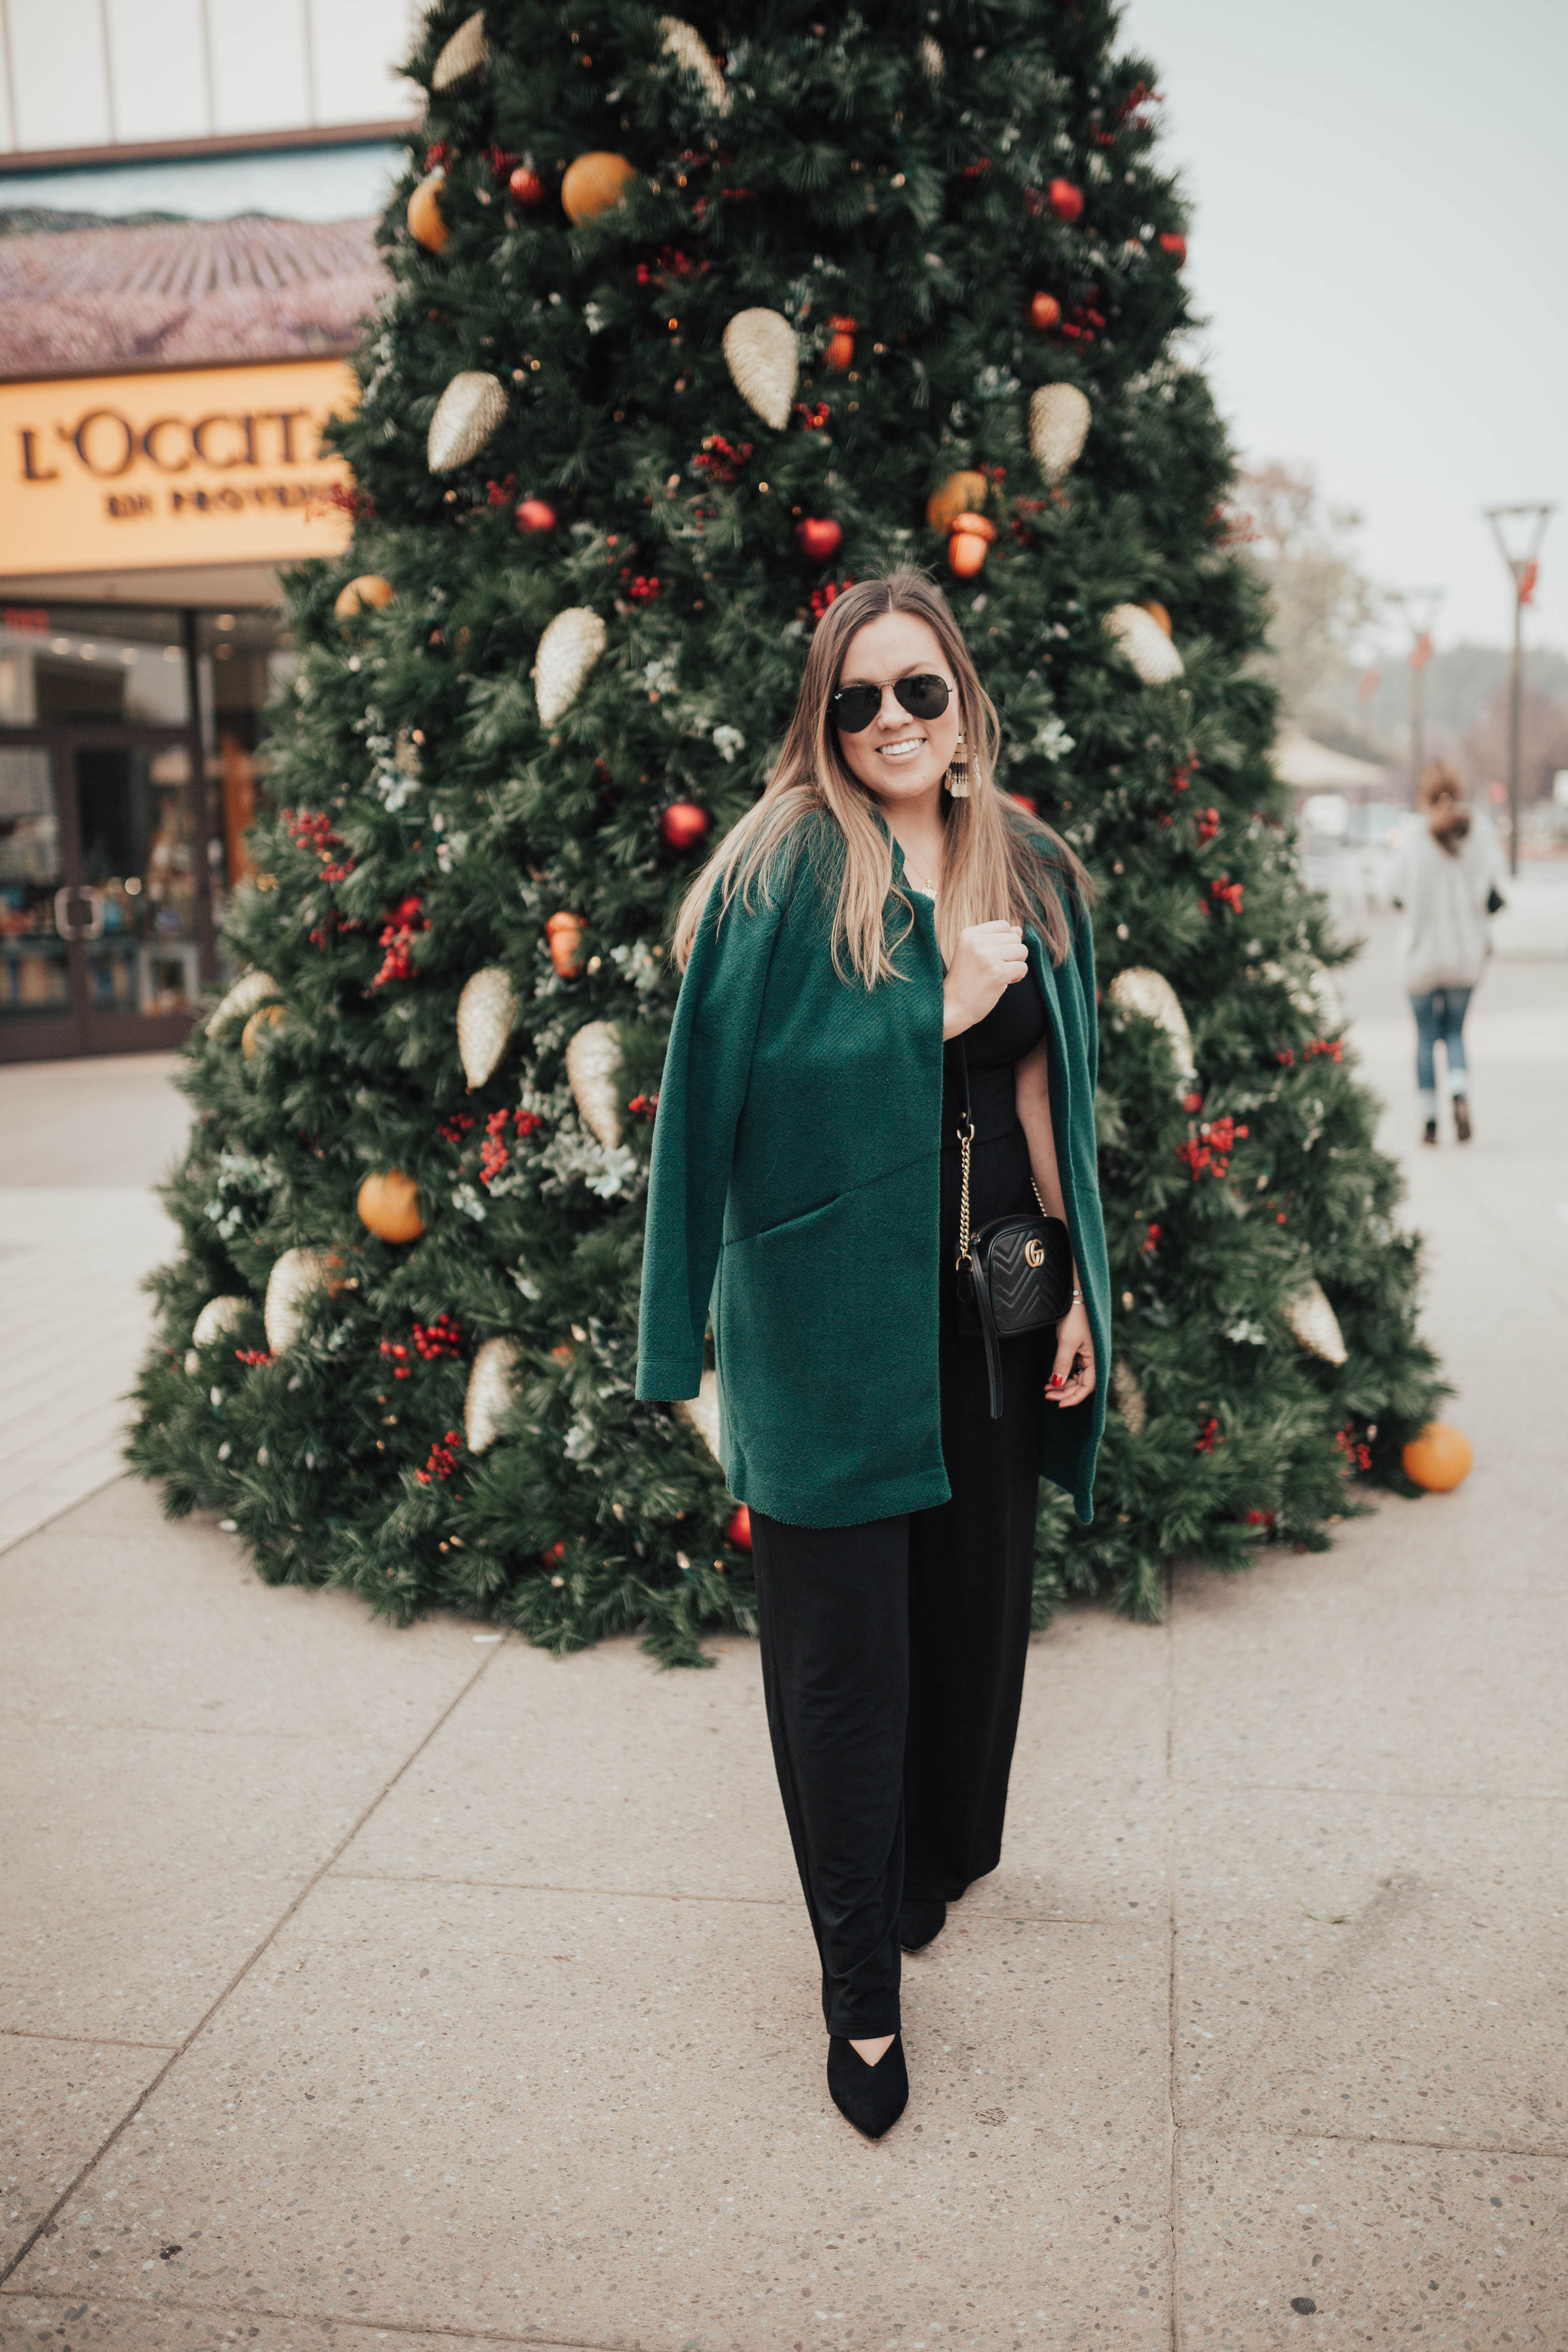 San Francisco blogger Ashley Zeal from Two Peas in a Prada shares her favorite holiday styles from Express. It's time to shine! 